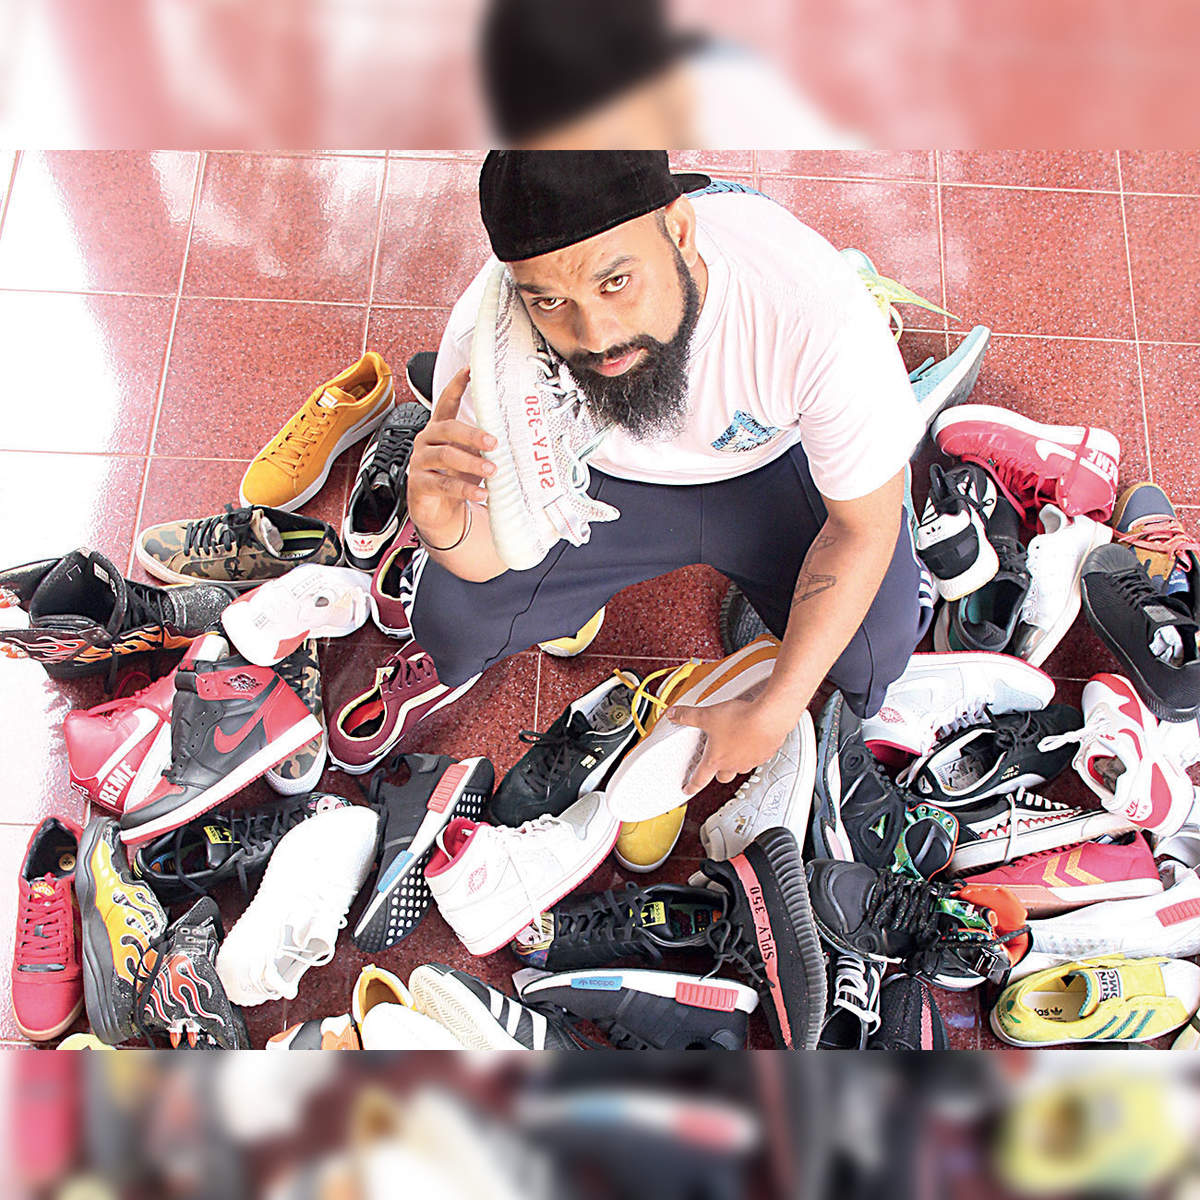 Dubai: Meet the sneakerhead with over 500 pairs of shoes, some